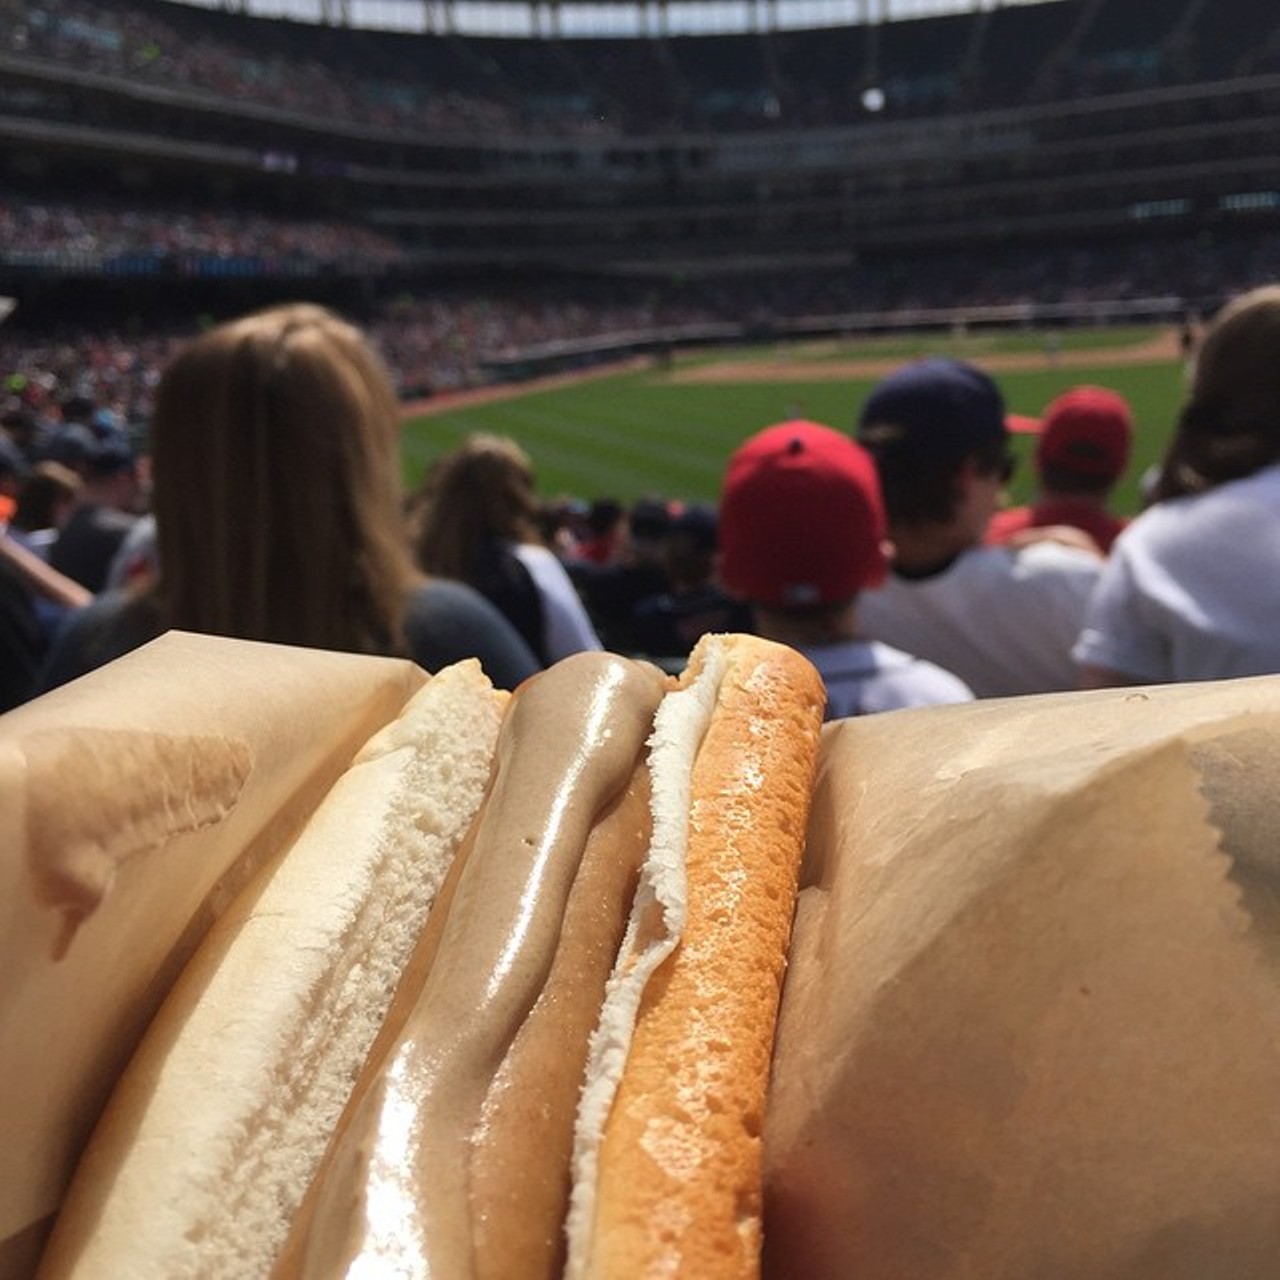 Progressive Field - 2401 Ontario St. -  Sugardale's all-beef hot dog with Ball Park mustard is worth a trip to the stadium in and of itself. (Photo by JKeppler615, Instagram)